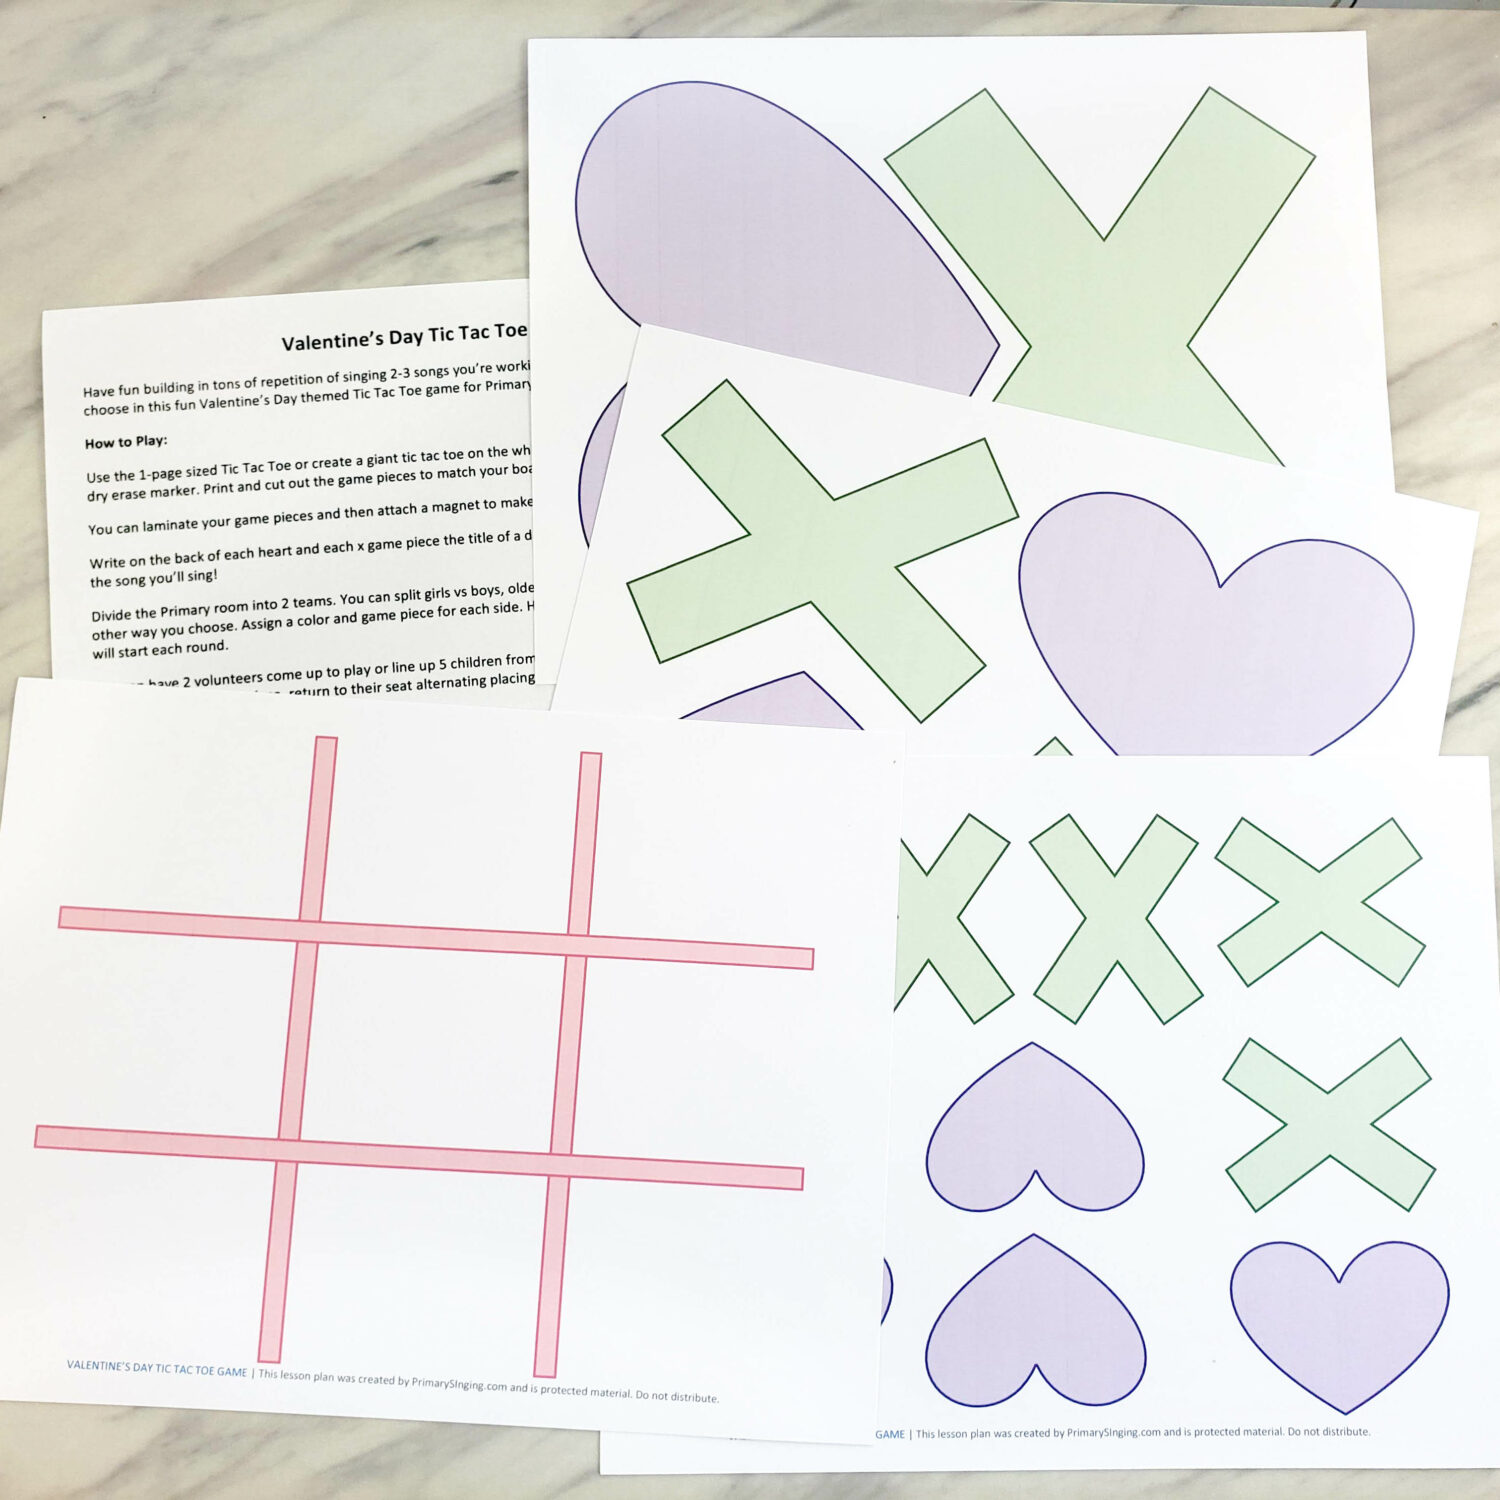 Valentine's Day tic tac toe game printable Primary singing time ideas for Valentine's Day